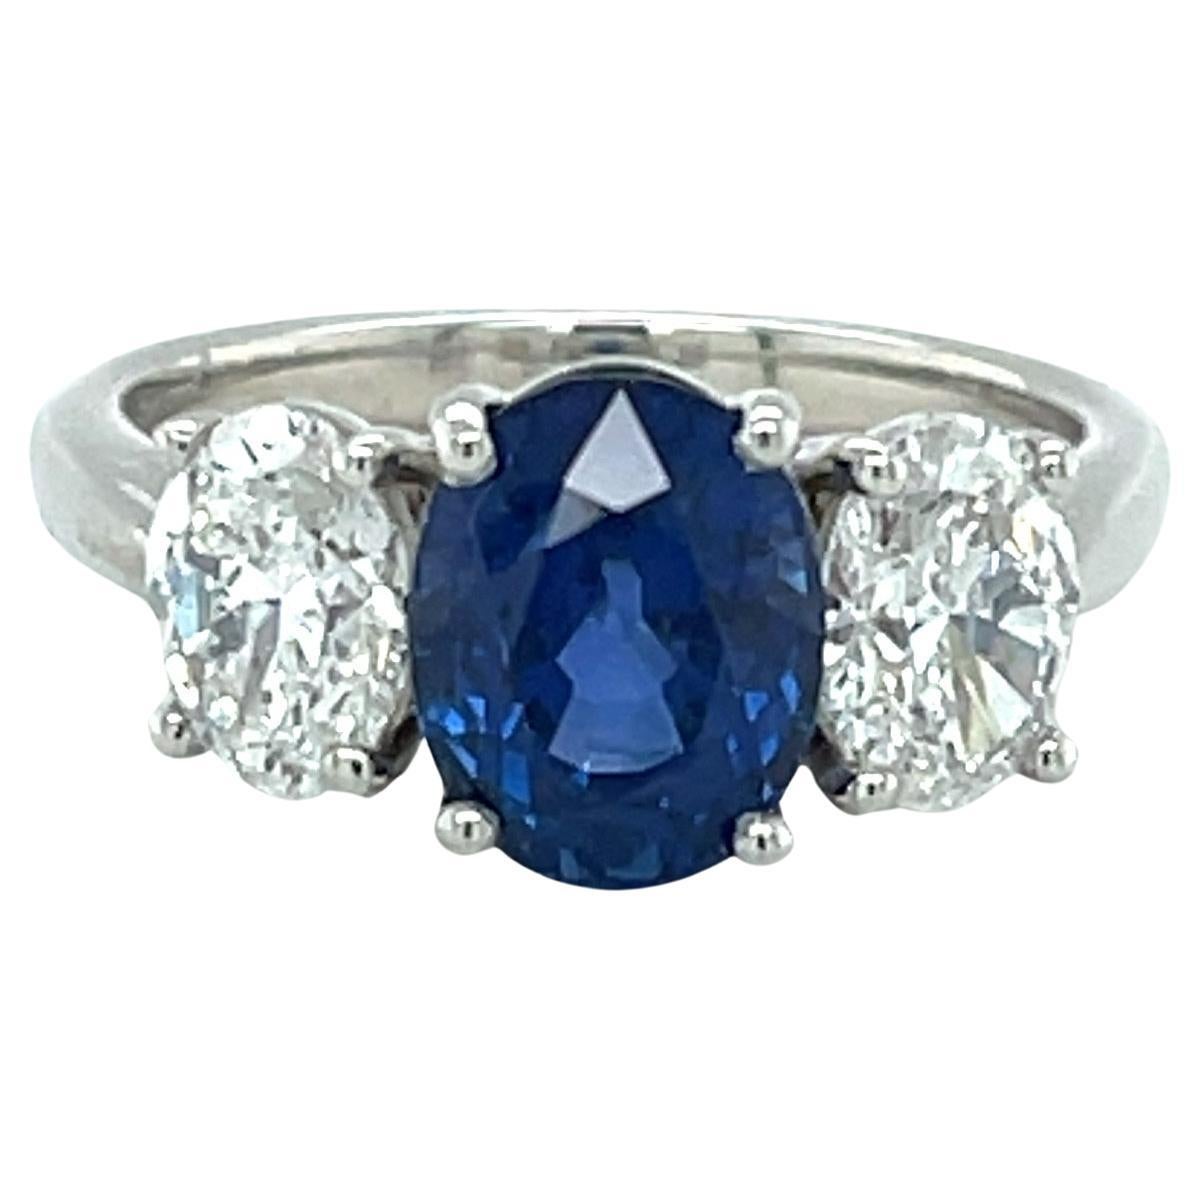 This gorgeous blue sapphire and diamond three-stone ring features a brilliant 3.20 carat oval Ceylon sapphire that has been certified by the GIA as unheated. Most sapphires on the market have been heated to reach this rich, vibrant shade of blue, so